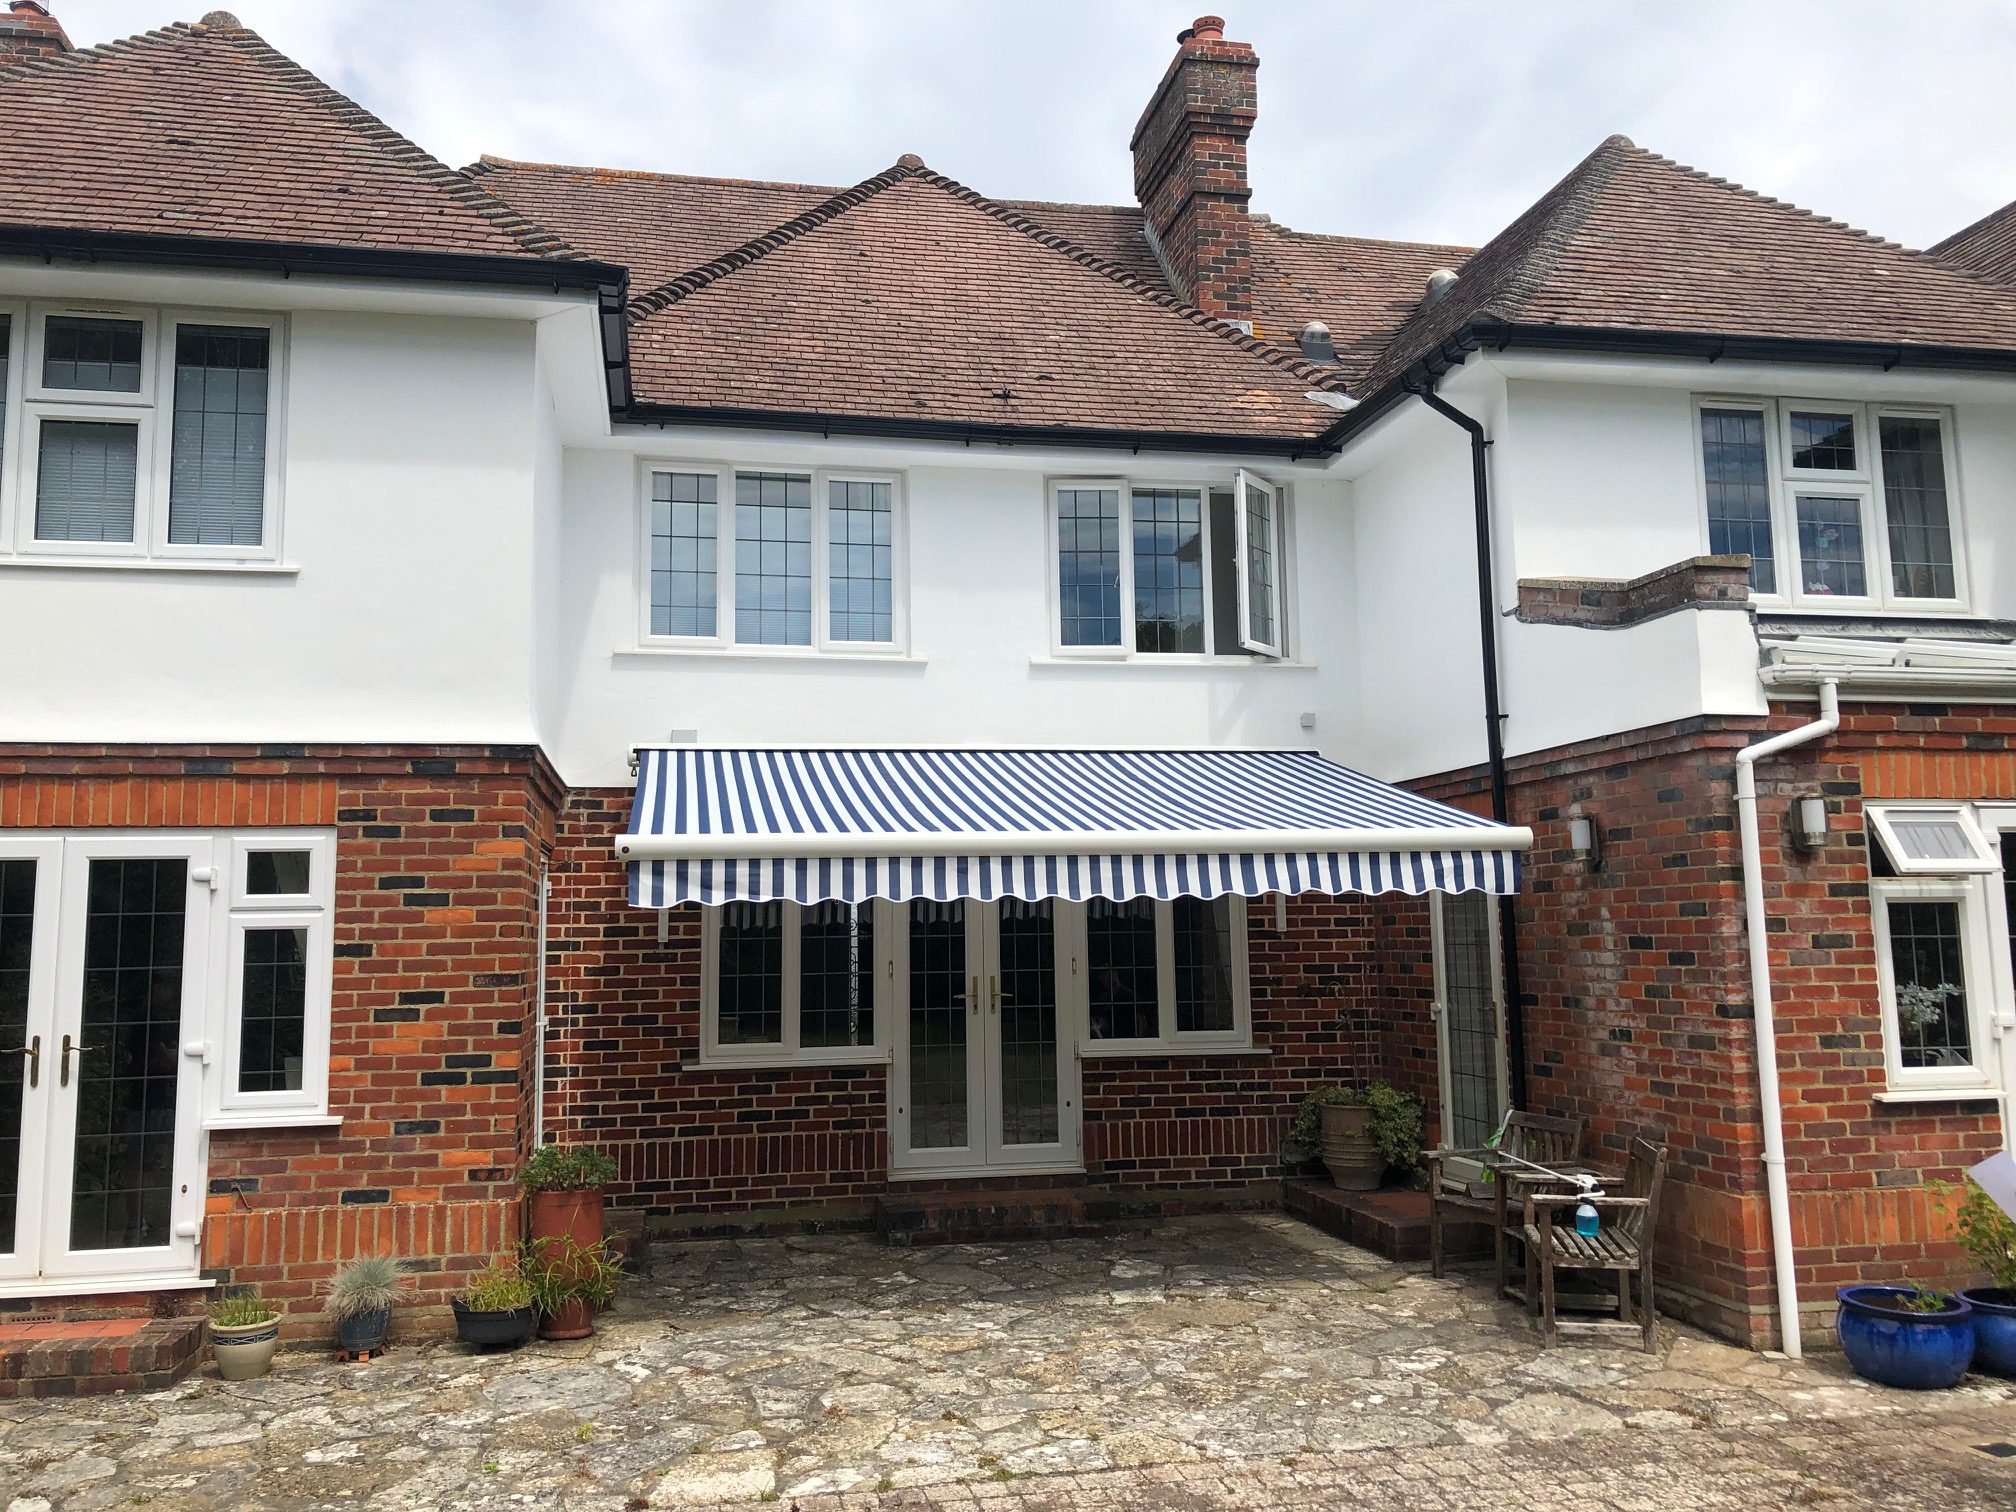 Photo of an awning installed on the front of a house in Chichester.